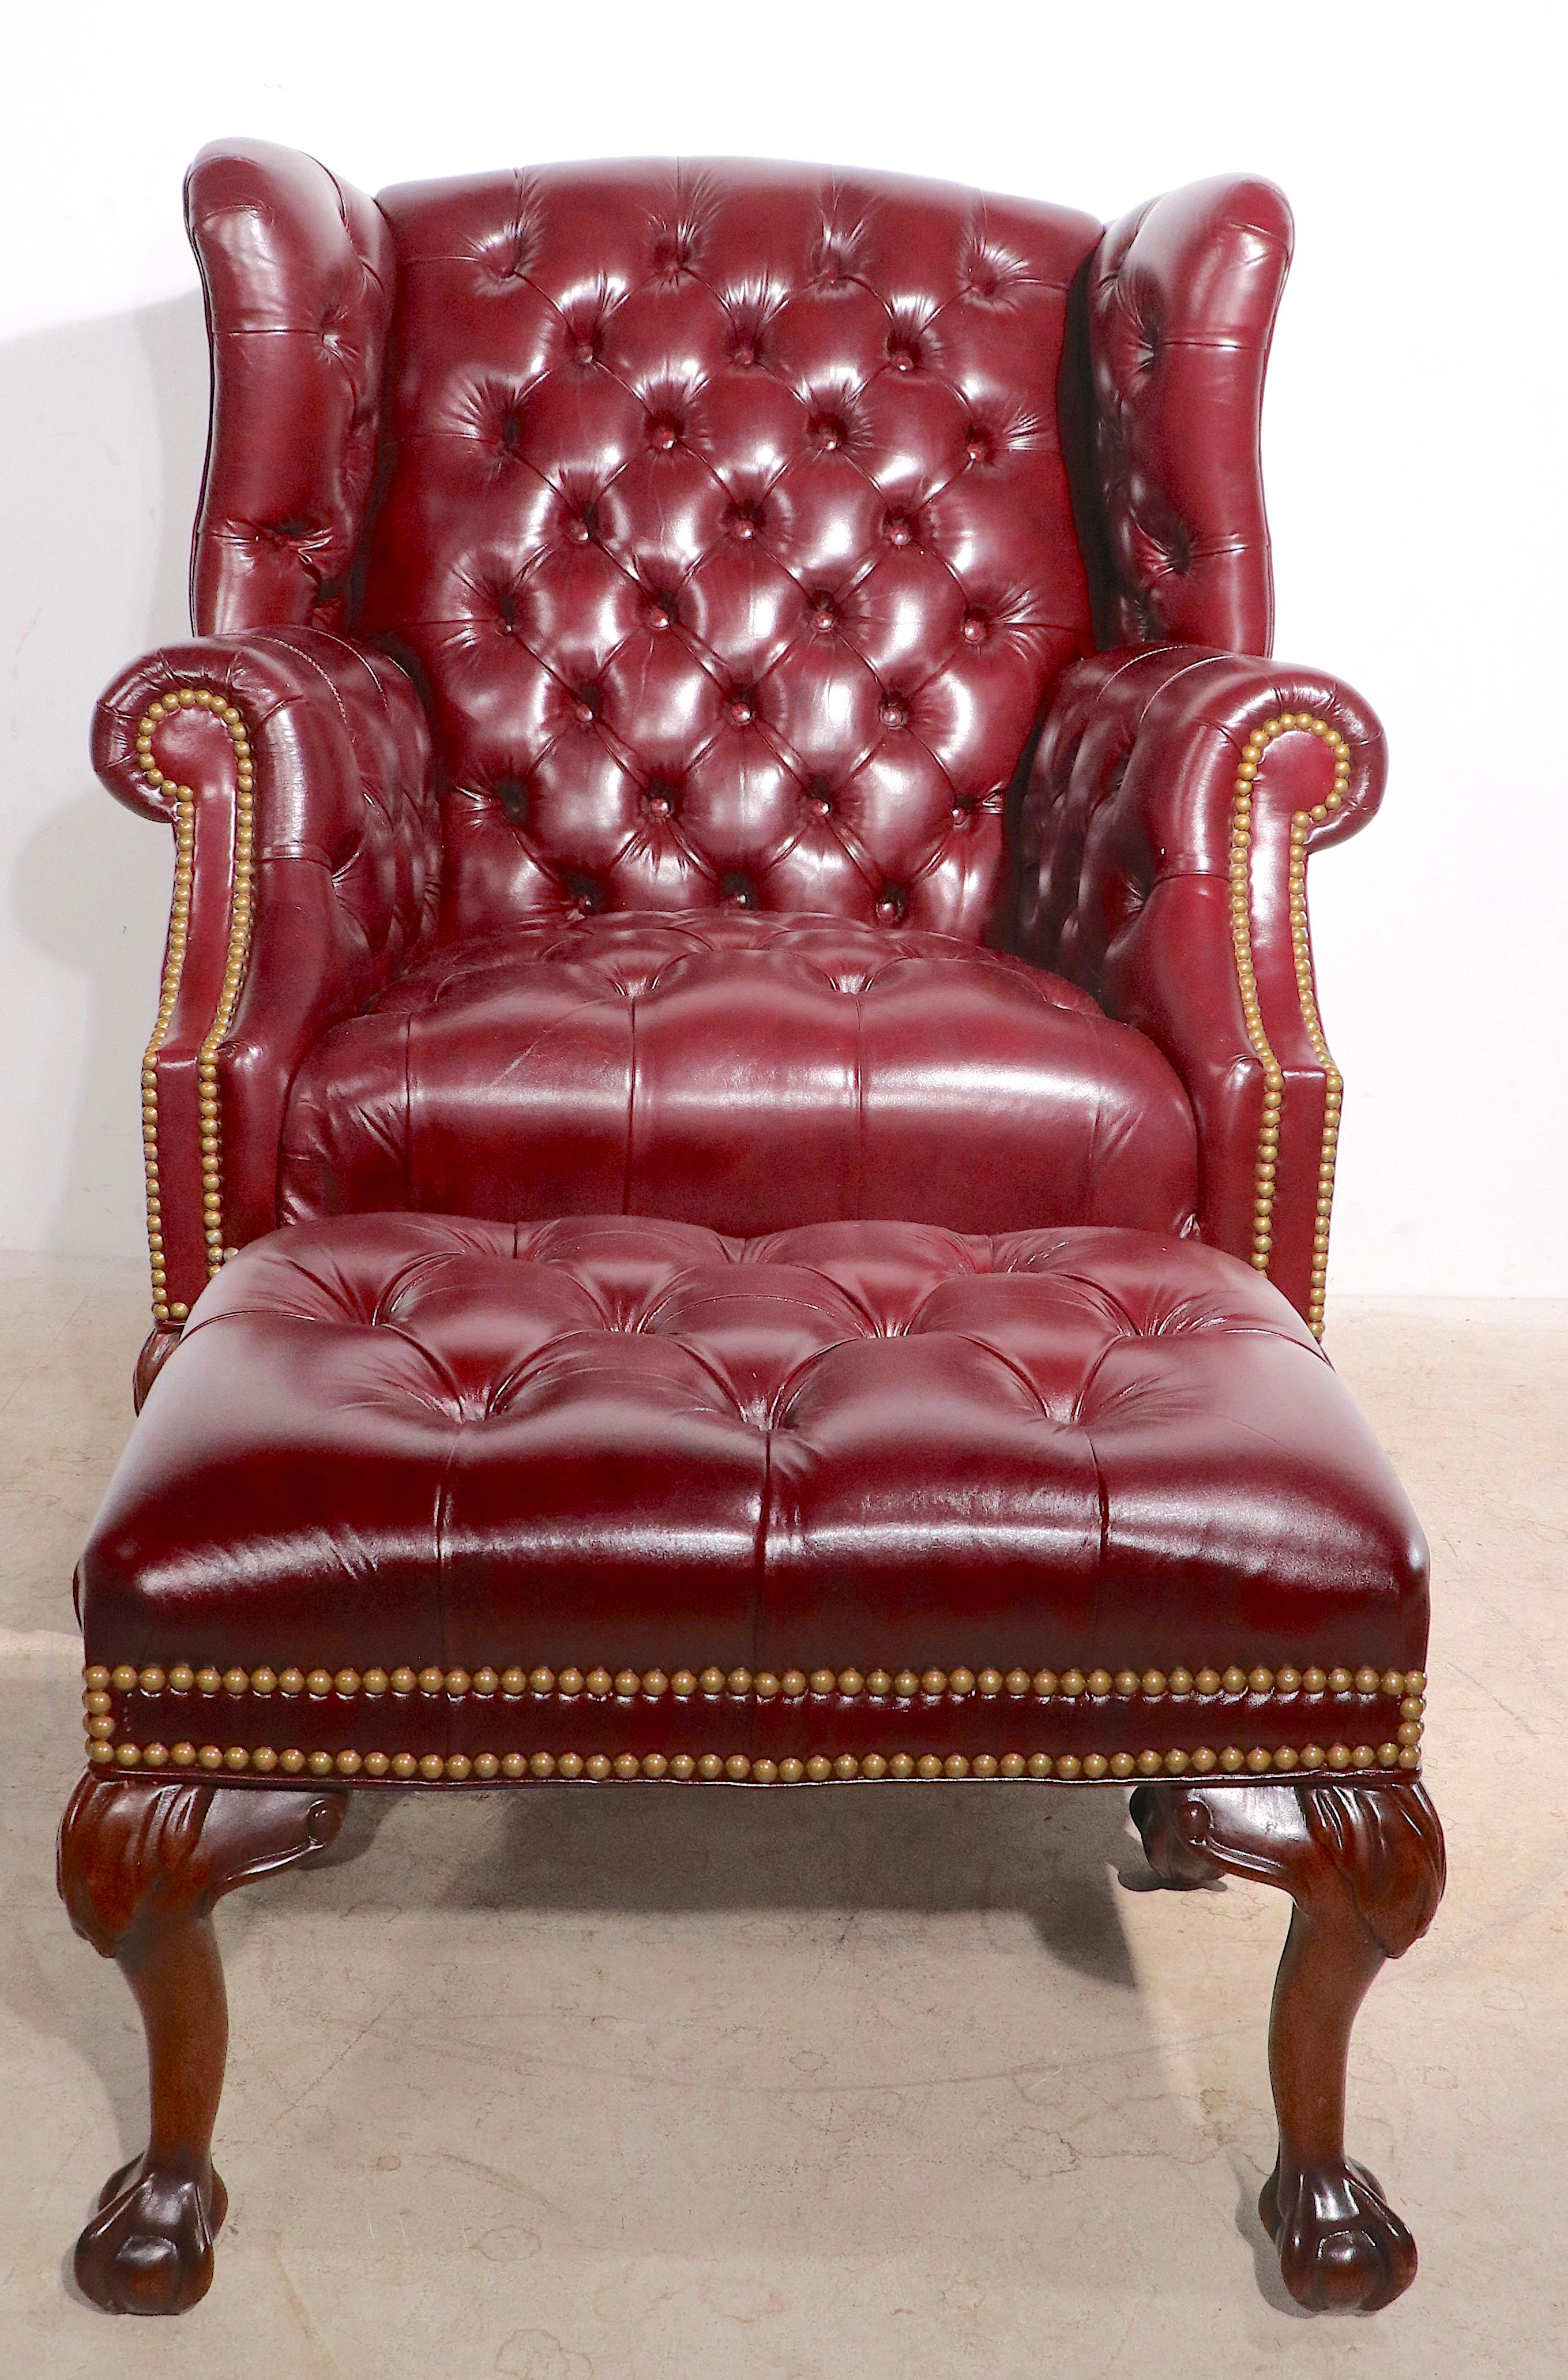 Exceptional button tufted leather wing chair and ottoman, with brass nailhead studded trim, and solid wood carved ball and claw feet. This lot includes the wing back chair and the matching footrest, ottoman. Both pieces are in very fine, original,